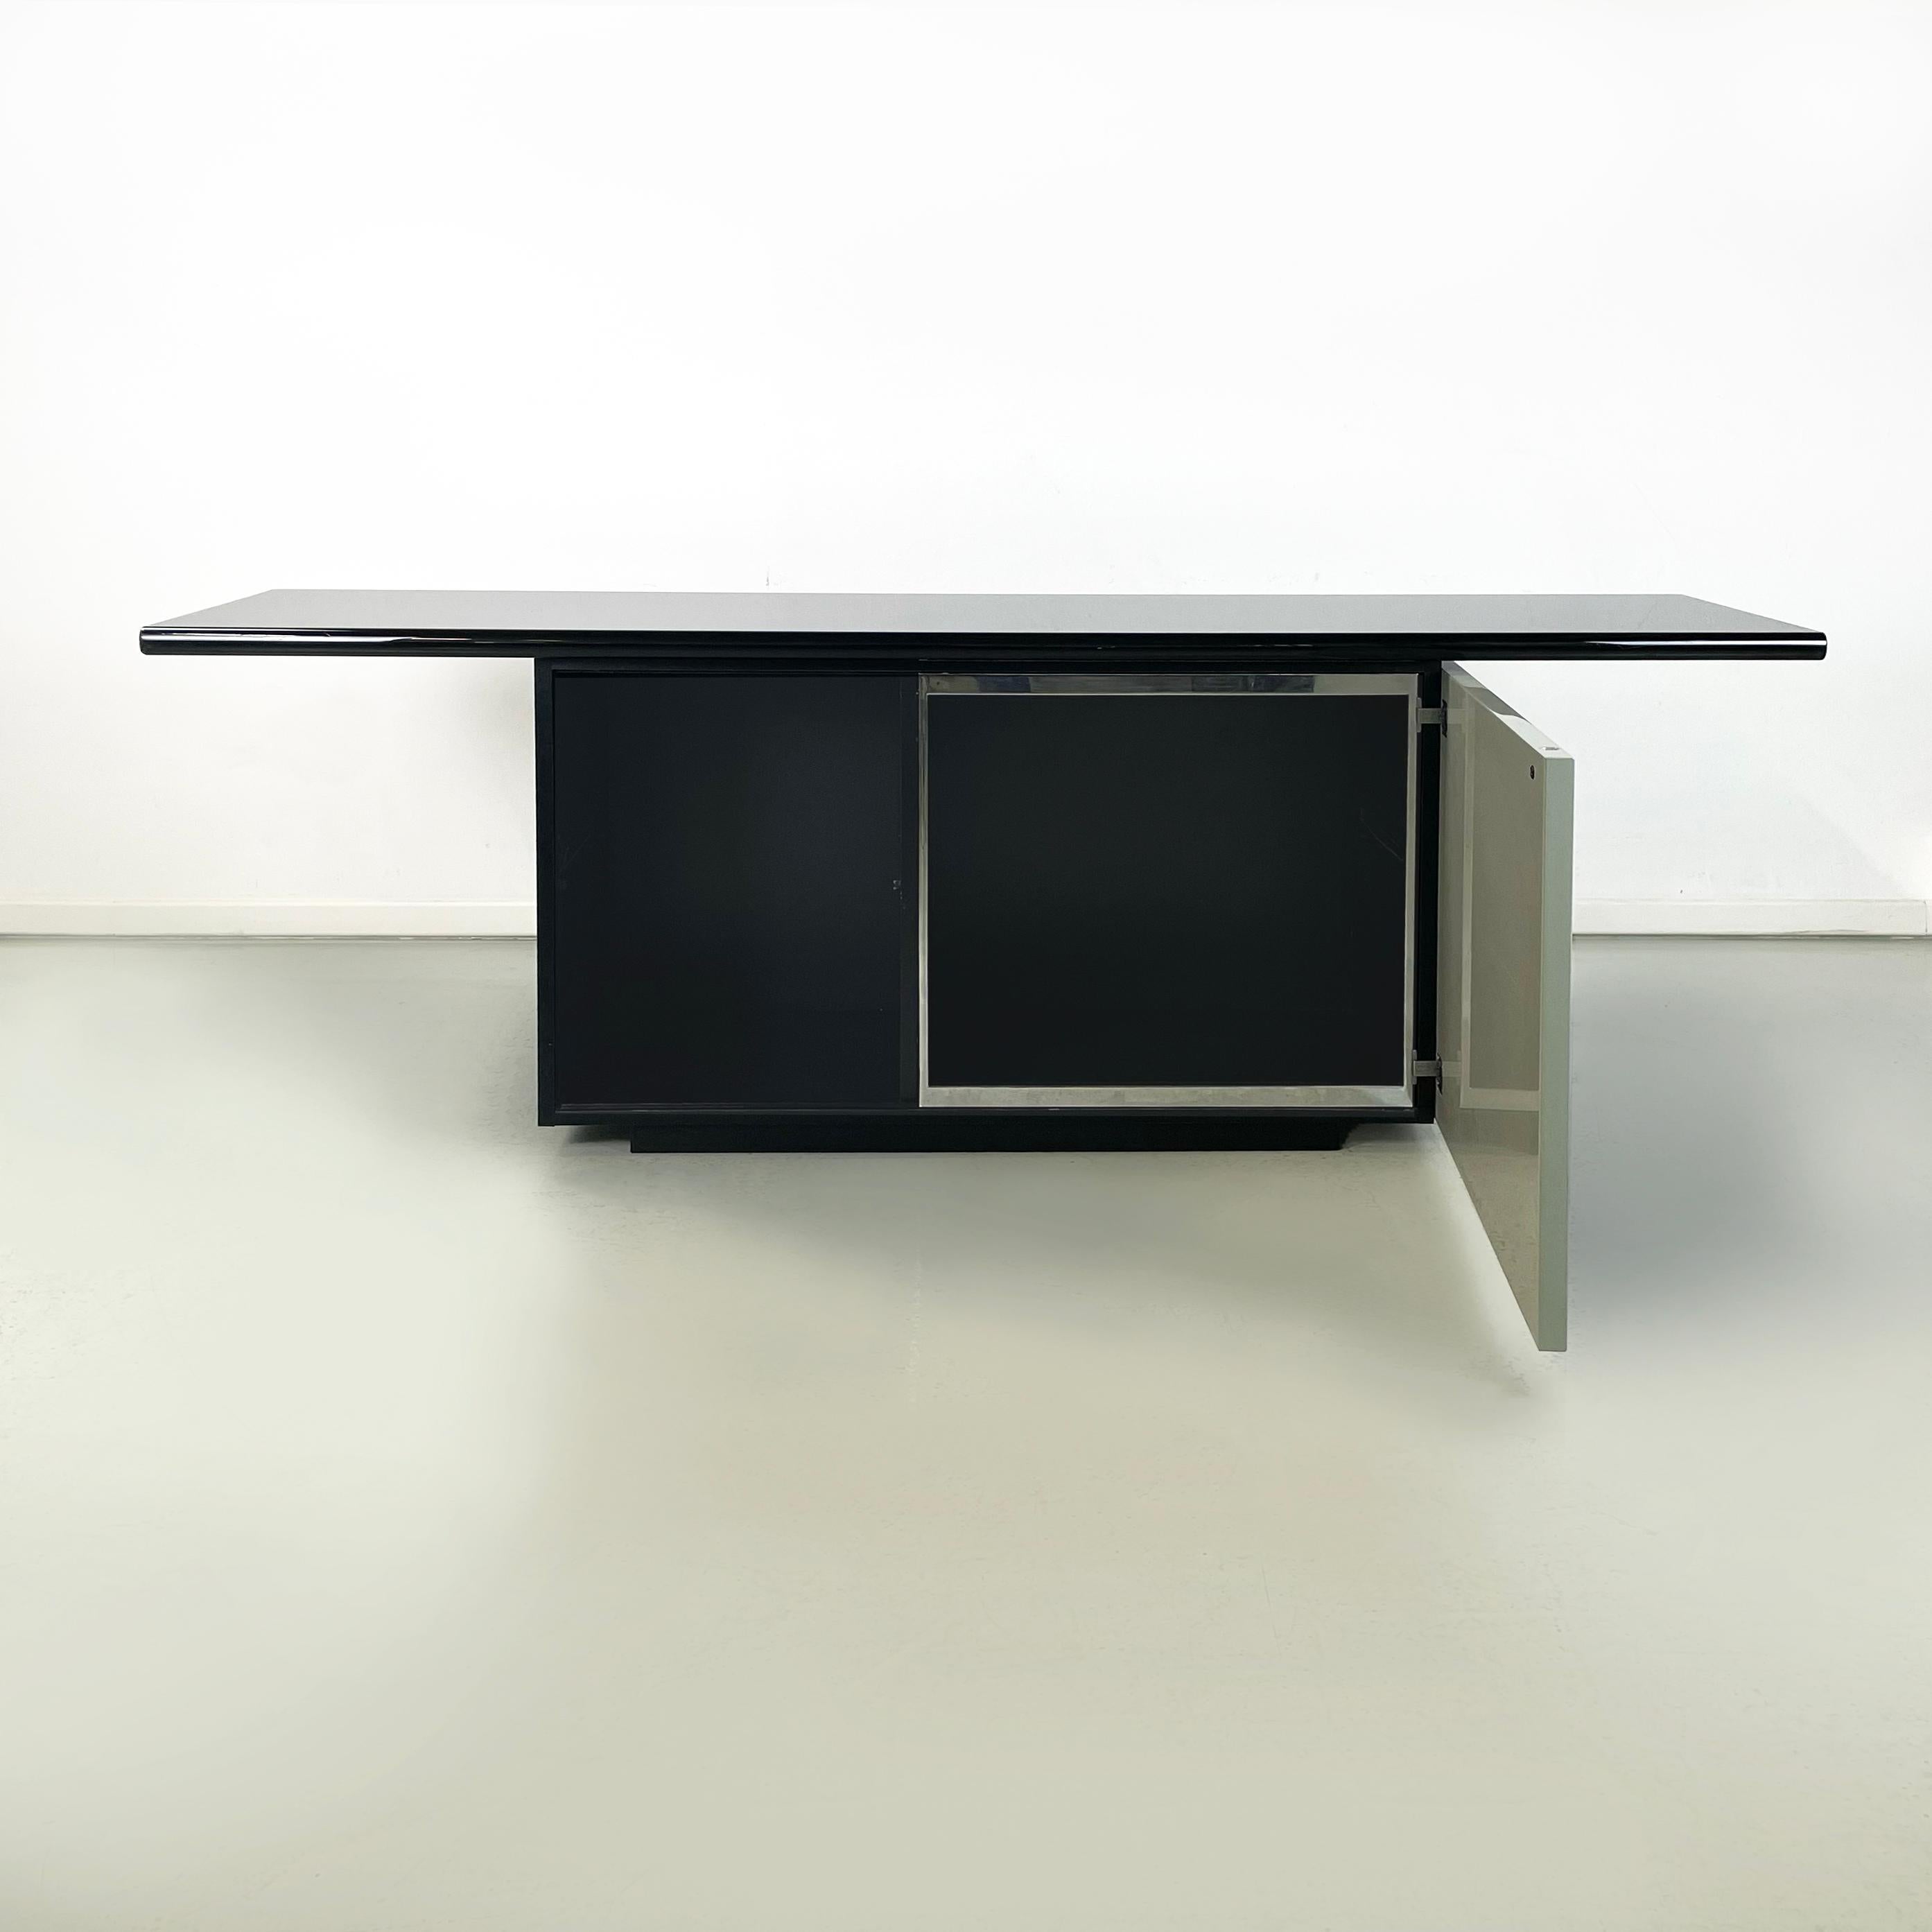 Italian modern Sideboard Sheraton by Giotto Stoppino and Lodovico Acerbis for Acerbis, 1980s
Sideboard mod. Sheraton in light gray and black lacquered wood. The rectangular top has a beveled front edge. On the front it has 2 compartments, one of